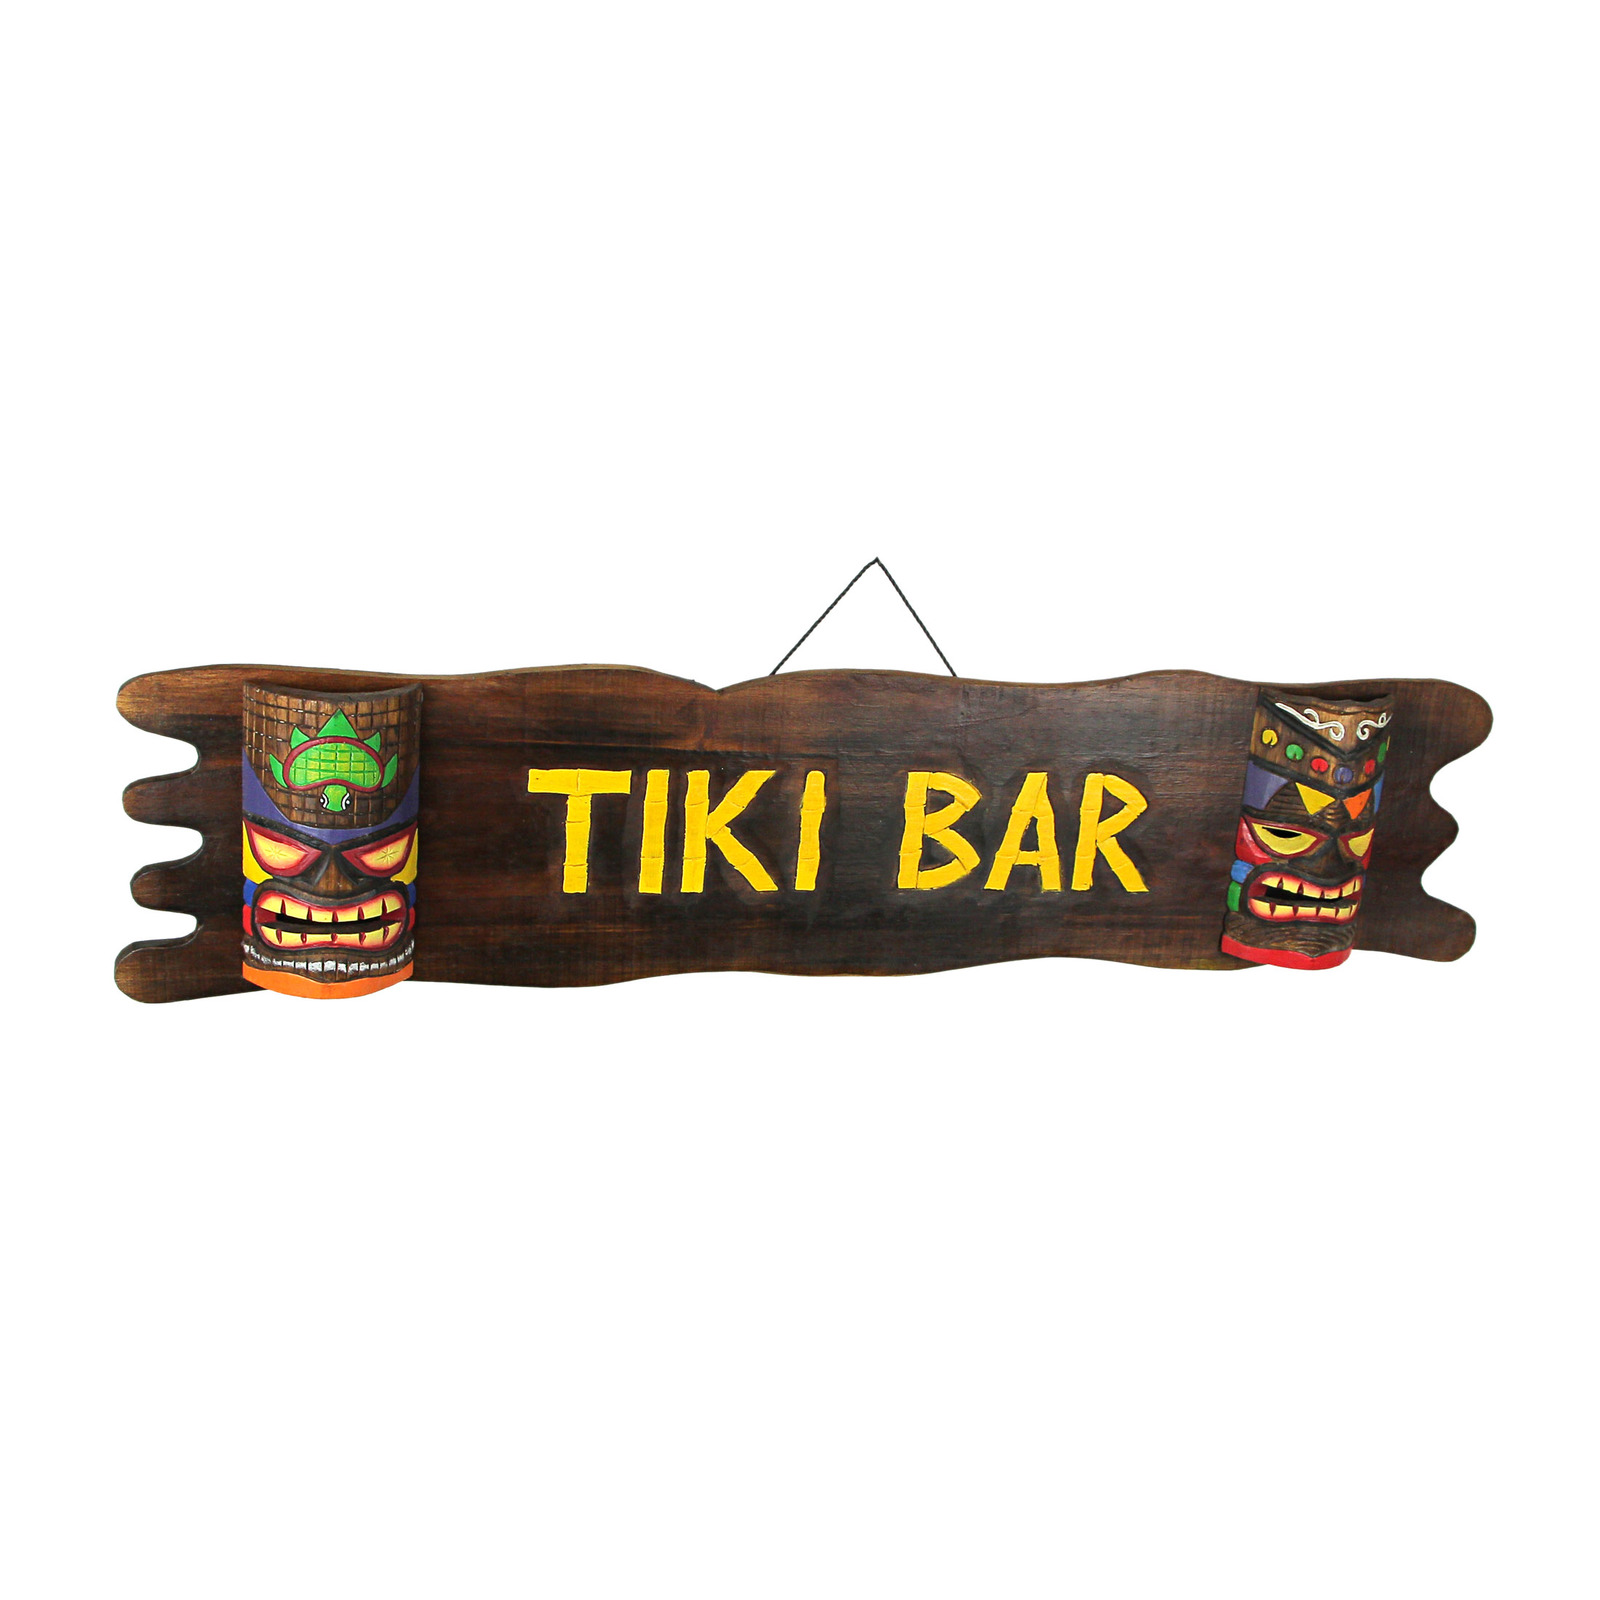 Primary image for 39 Inch Wood Tiki Bar Hanging Sign Hand Carved Decorative Mask Sculpture Decor